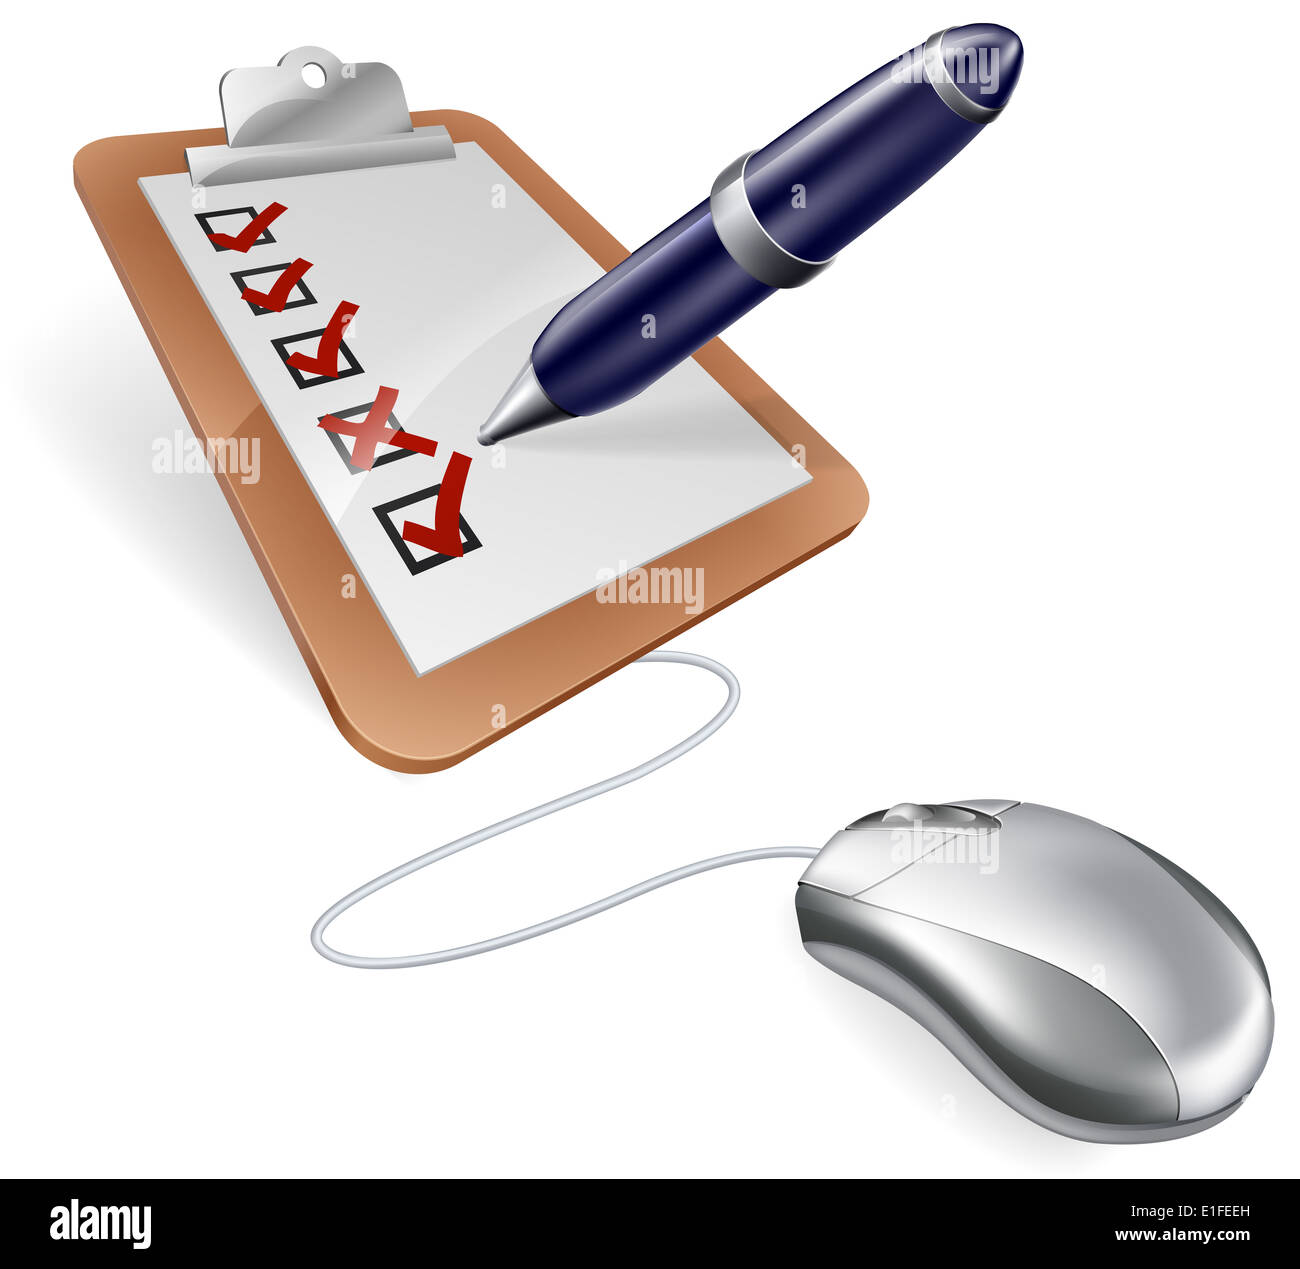 An illustration of a survey clip board or feedback form and computer mouse concept Stock Photo